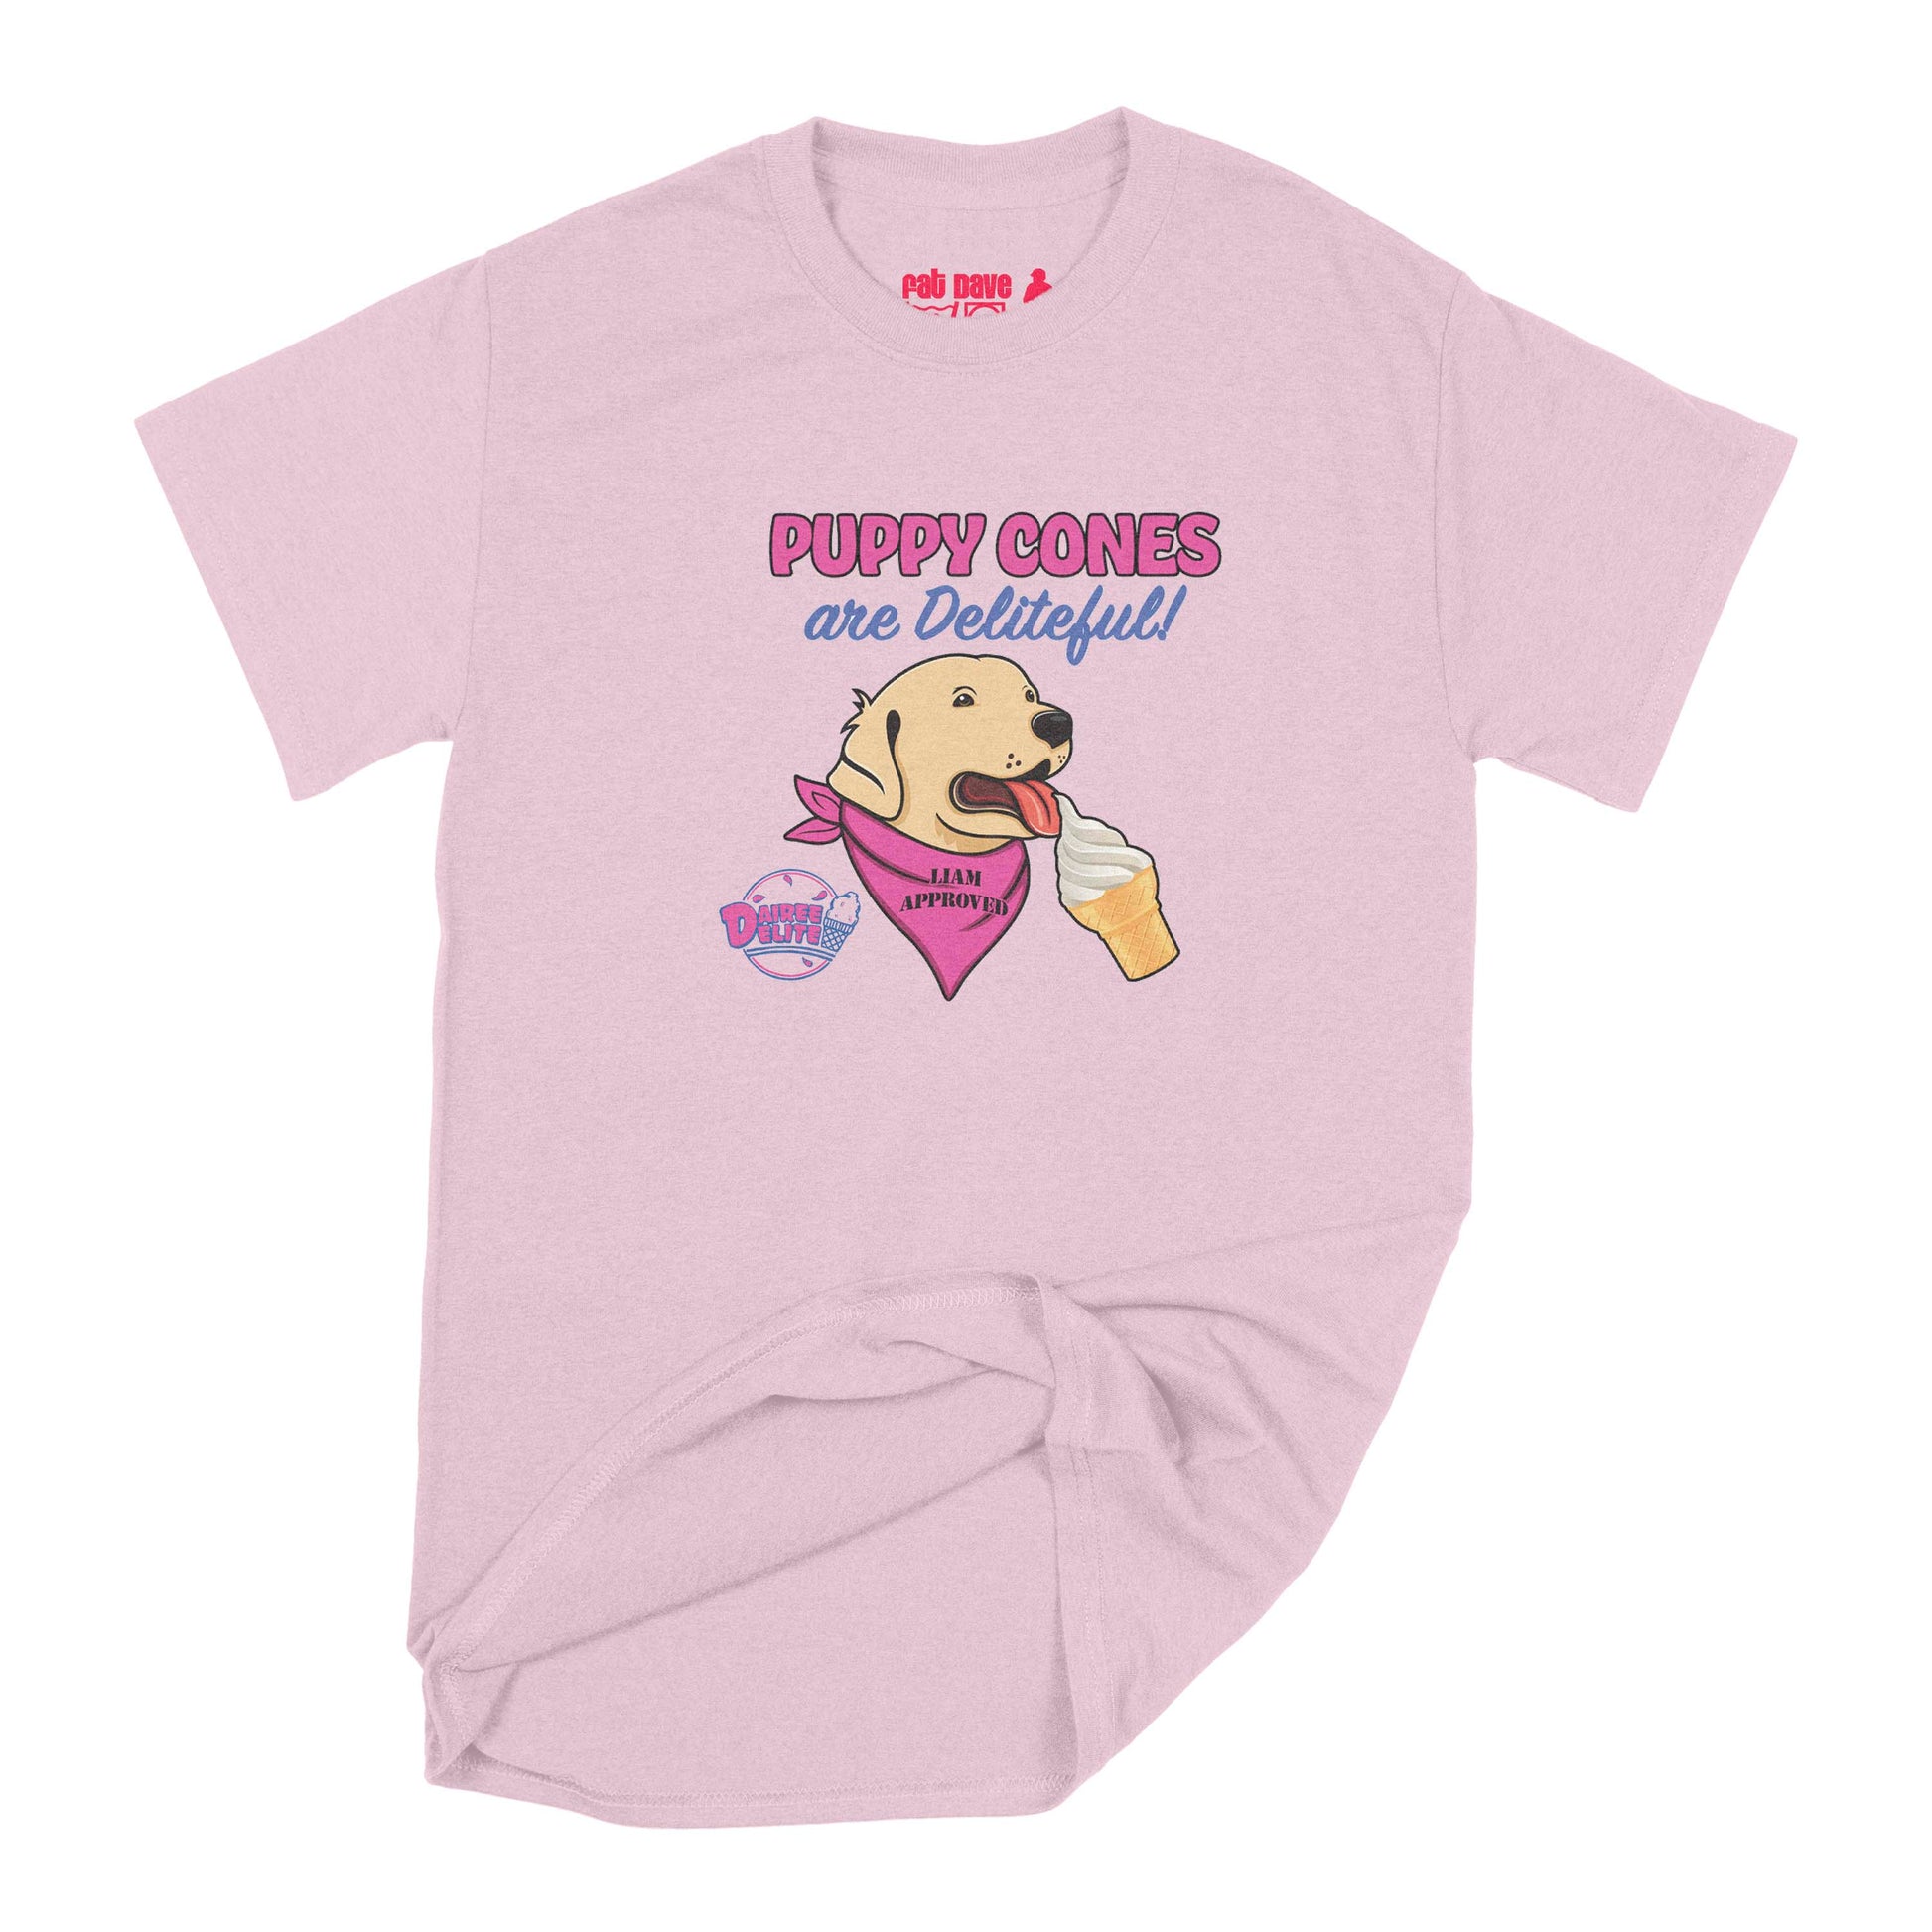 Dairee Delite 70th Anniversary Puppy Cone T-Shirt Small Light Pink